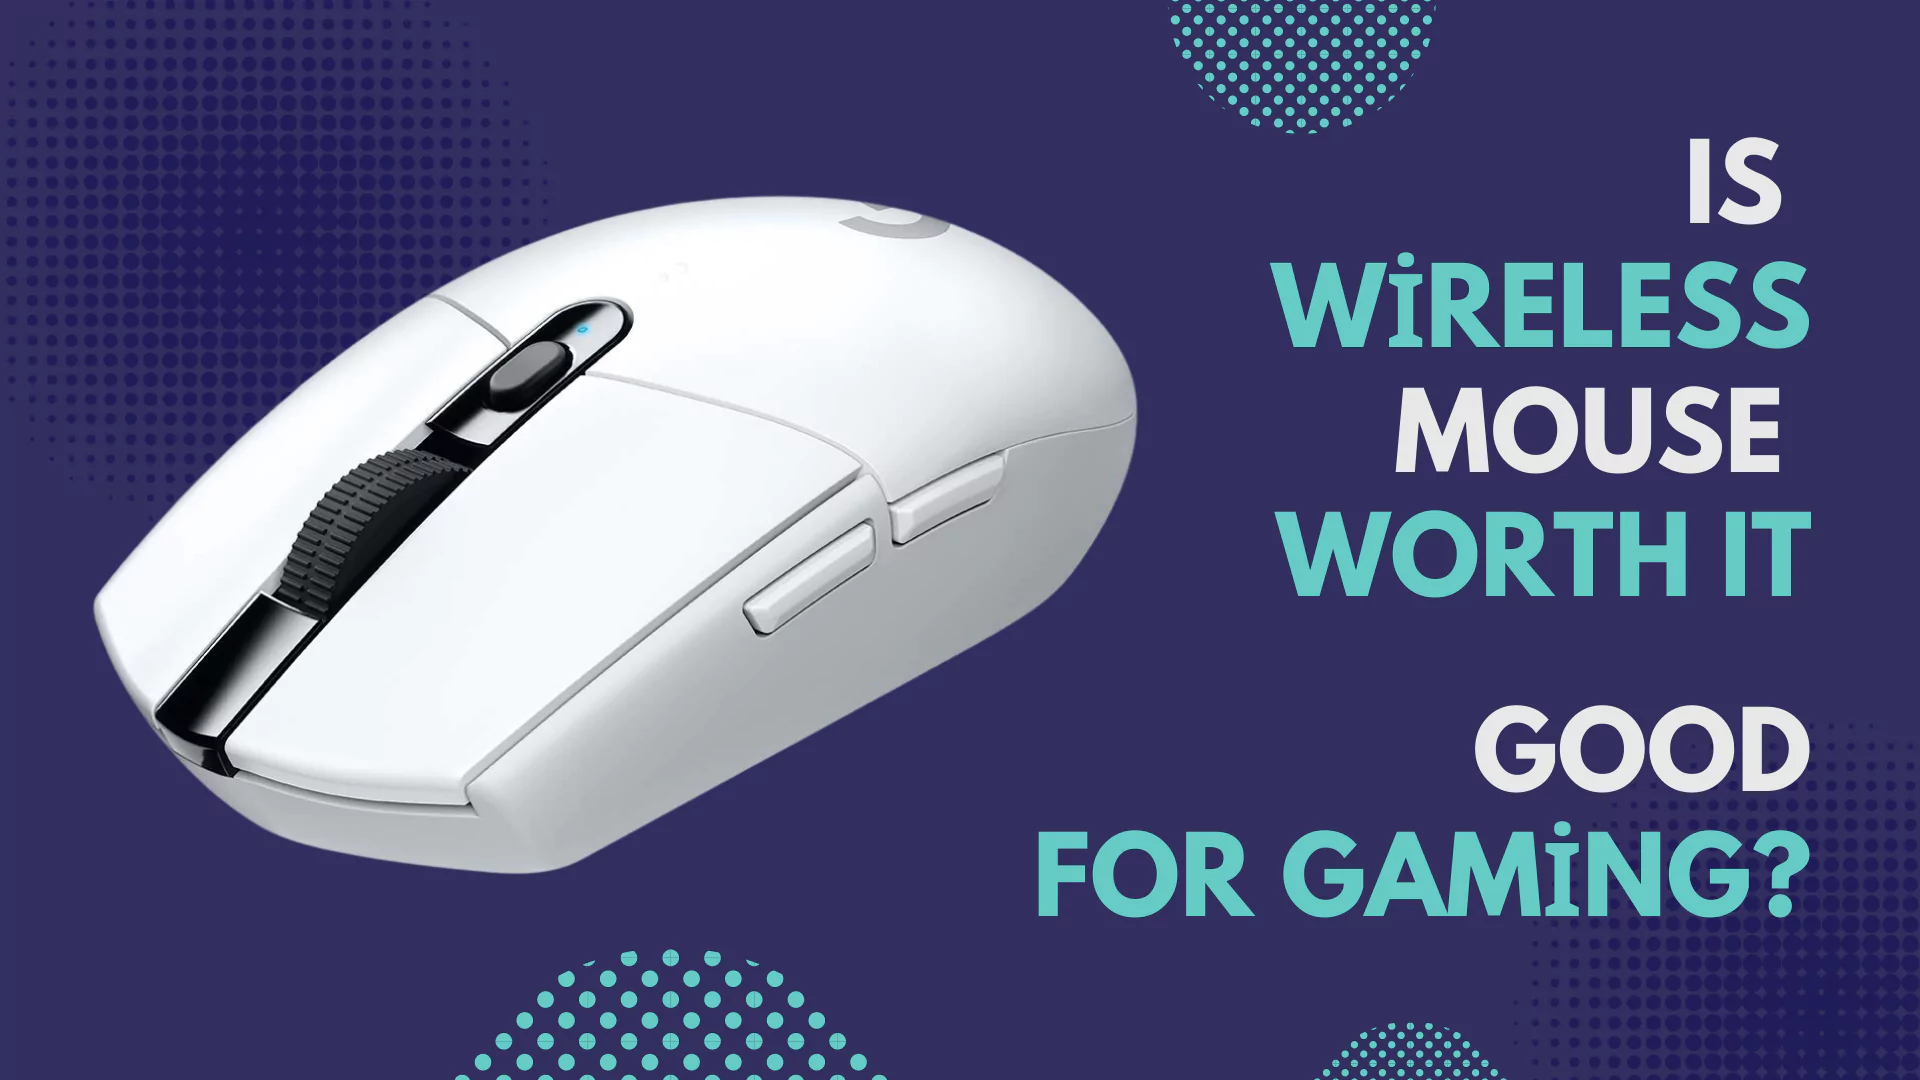 Is Wireless Mouse Worth It? | Wireless Mouse Is Good For Gaming?